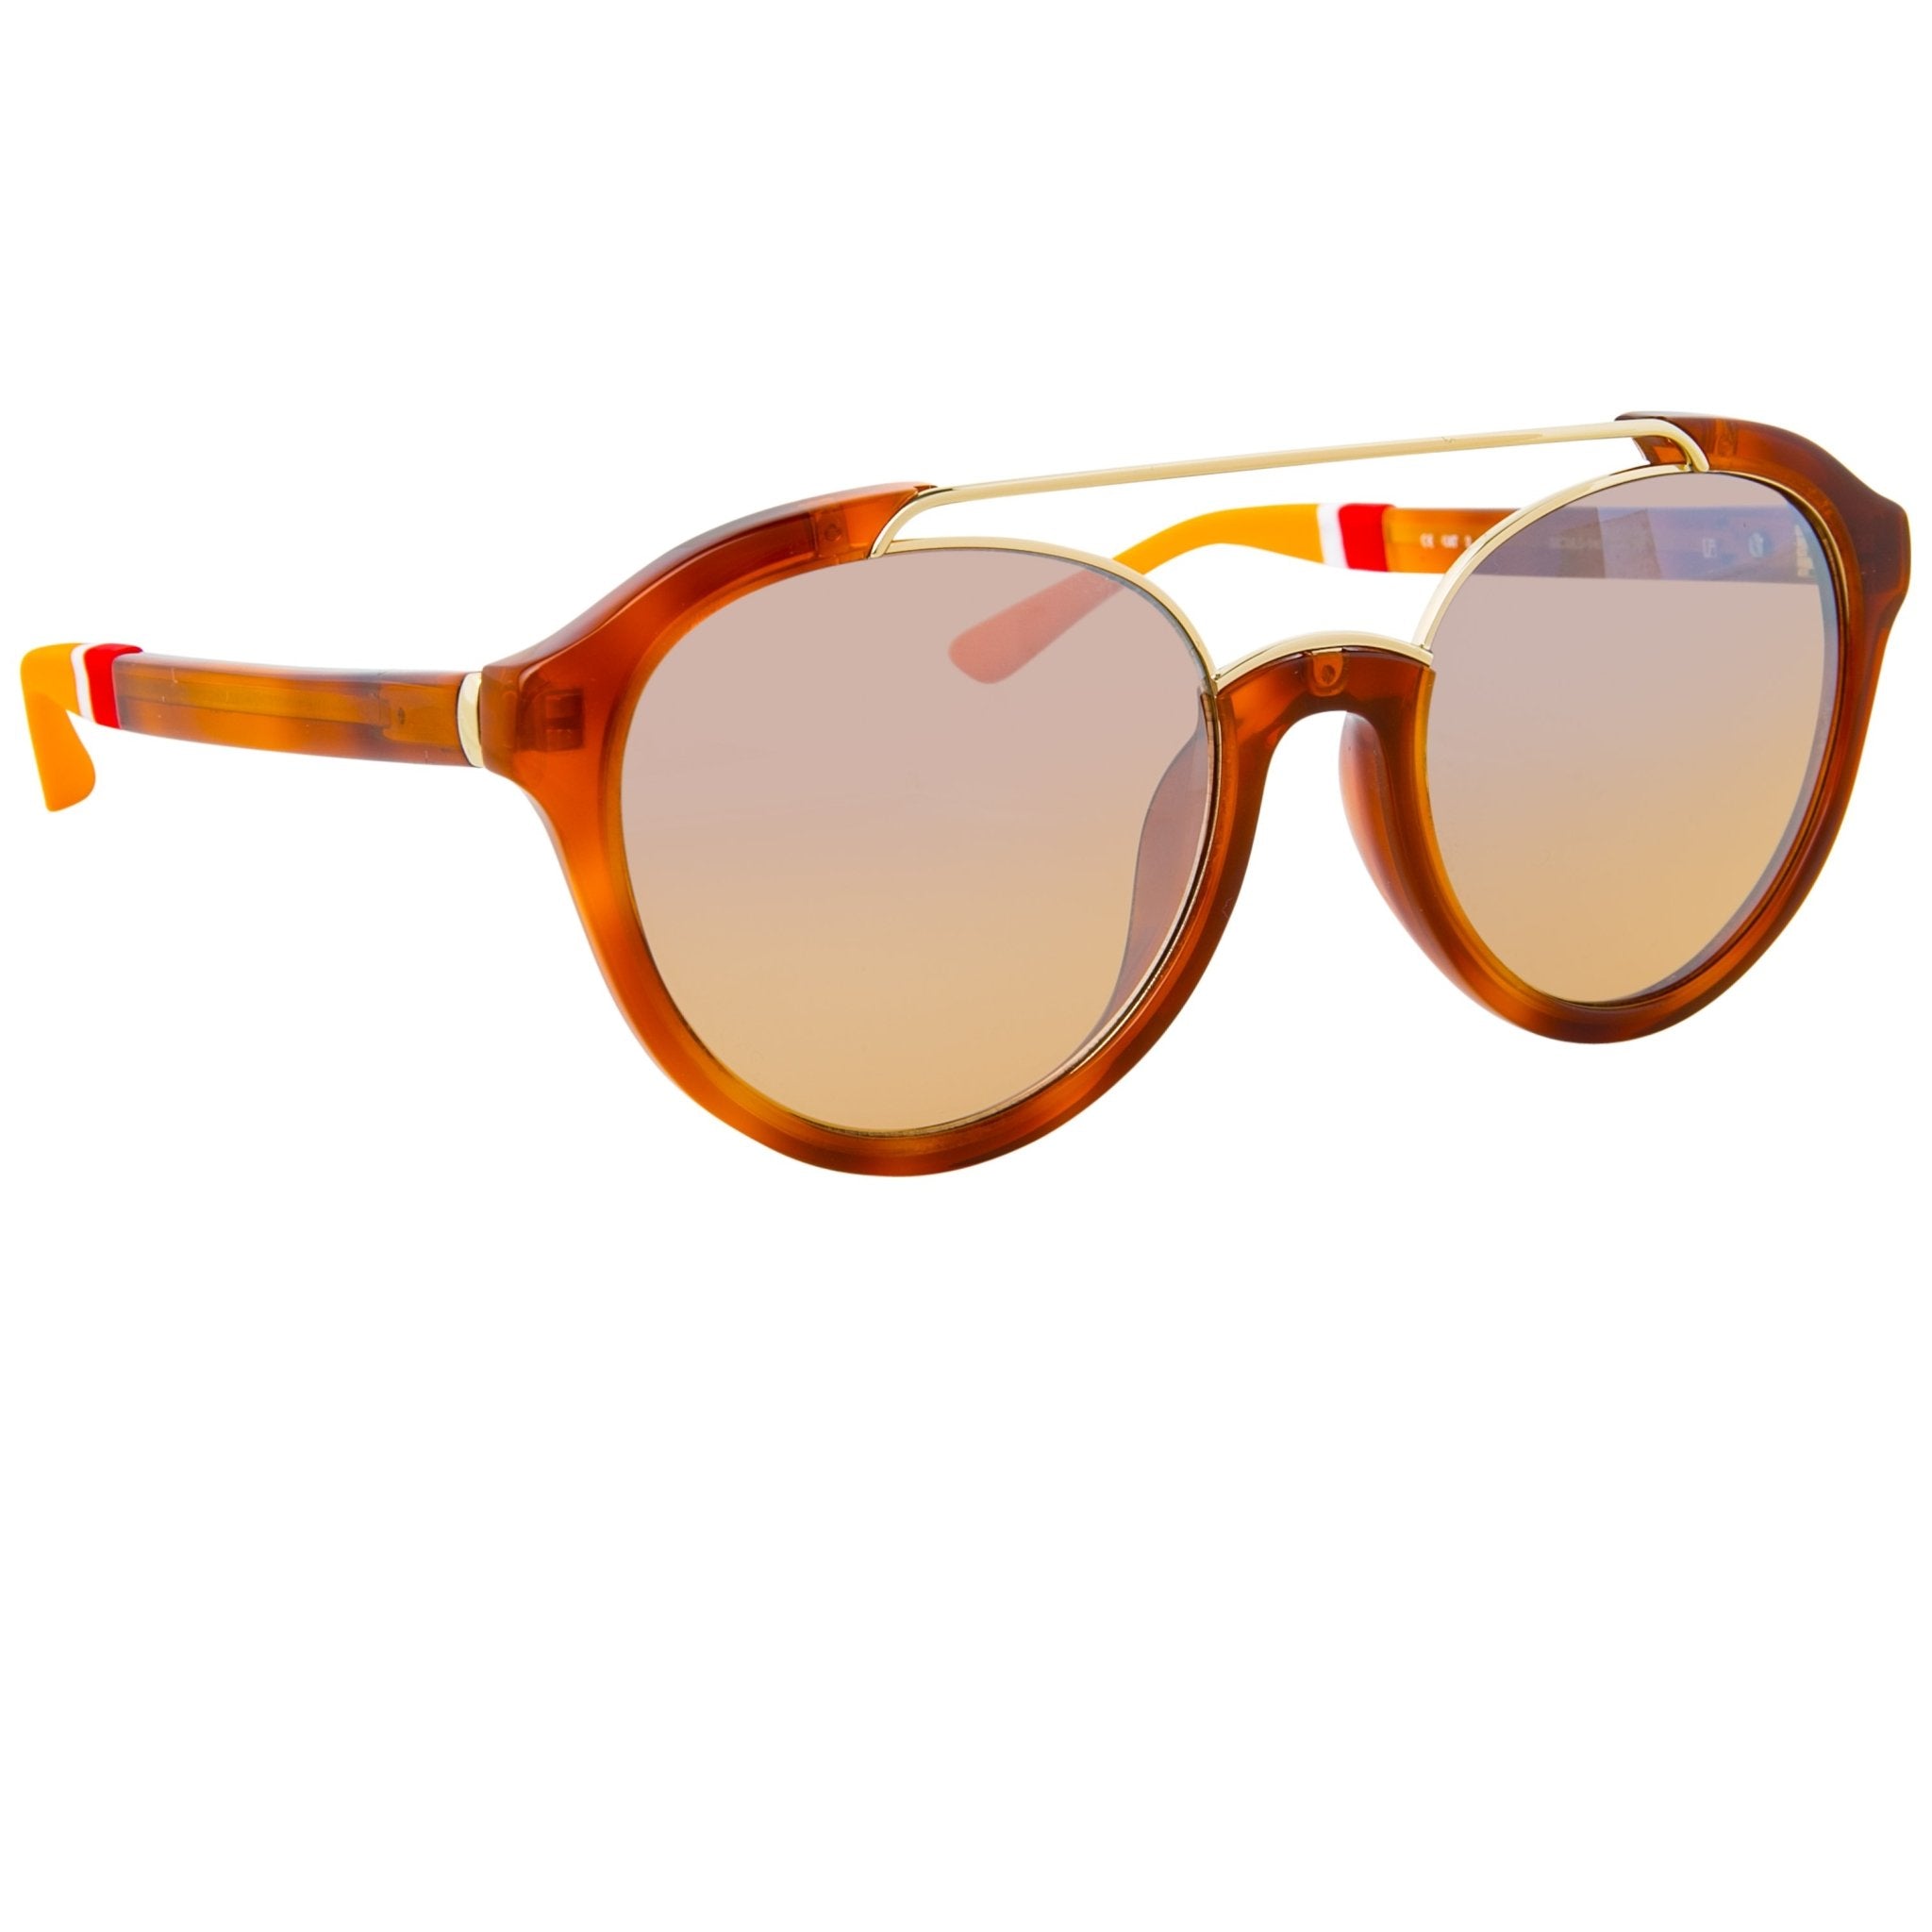 Orlebar Brown Sunglasses Oval Amber Tortise Shell with Orange Lenses OB42C3SUN - Watches & Crystals